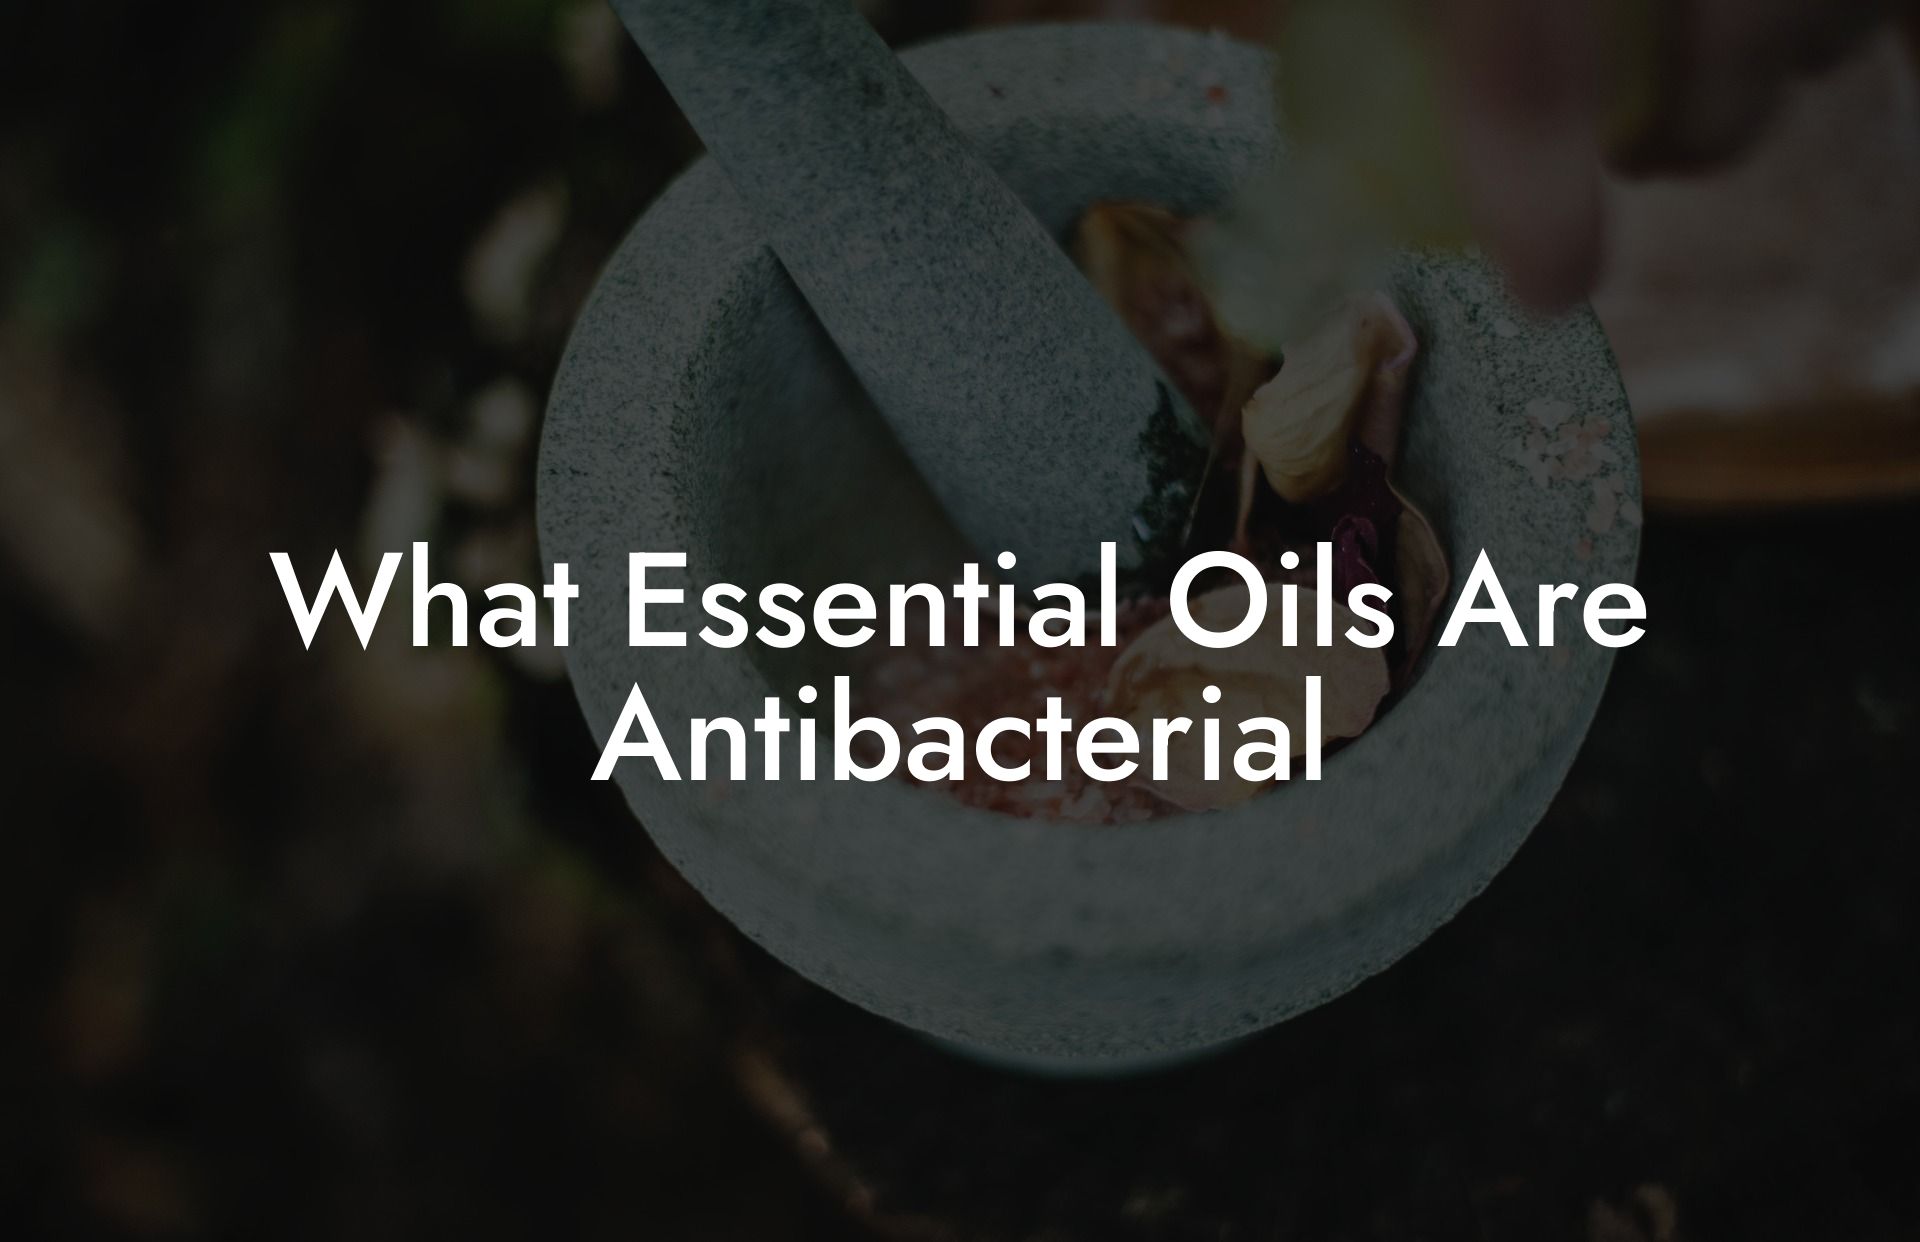 What Essential Oils Are Antibacterial